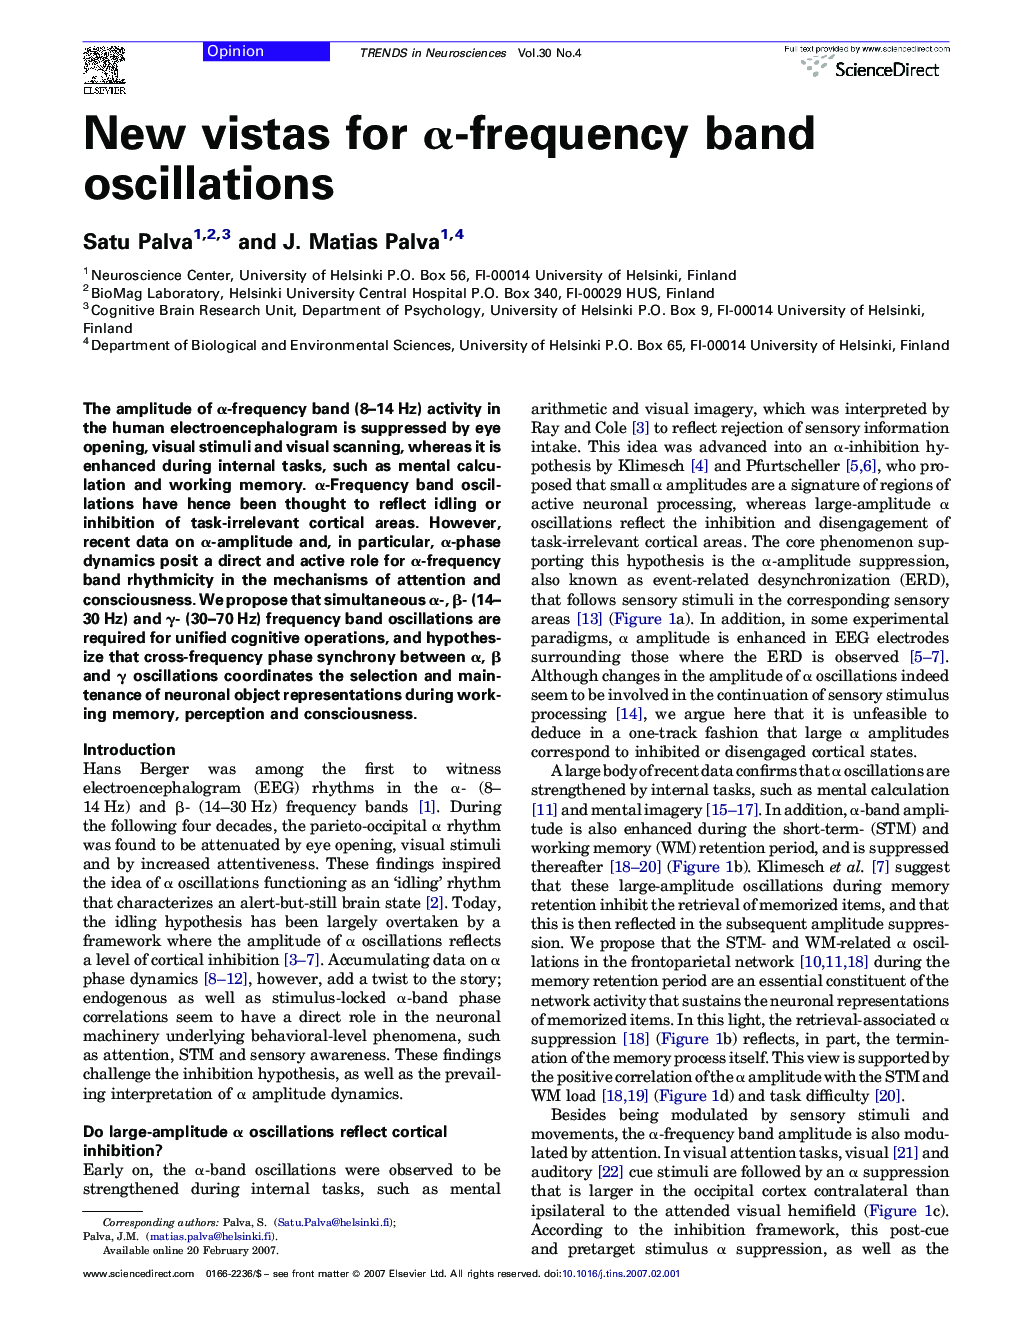 New vistas for α-frequency band oscillations